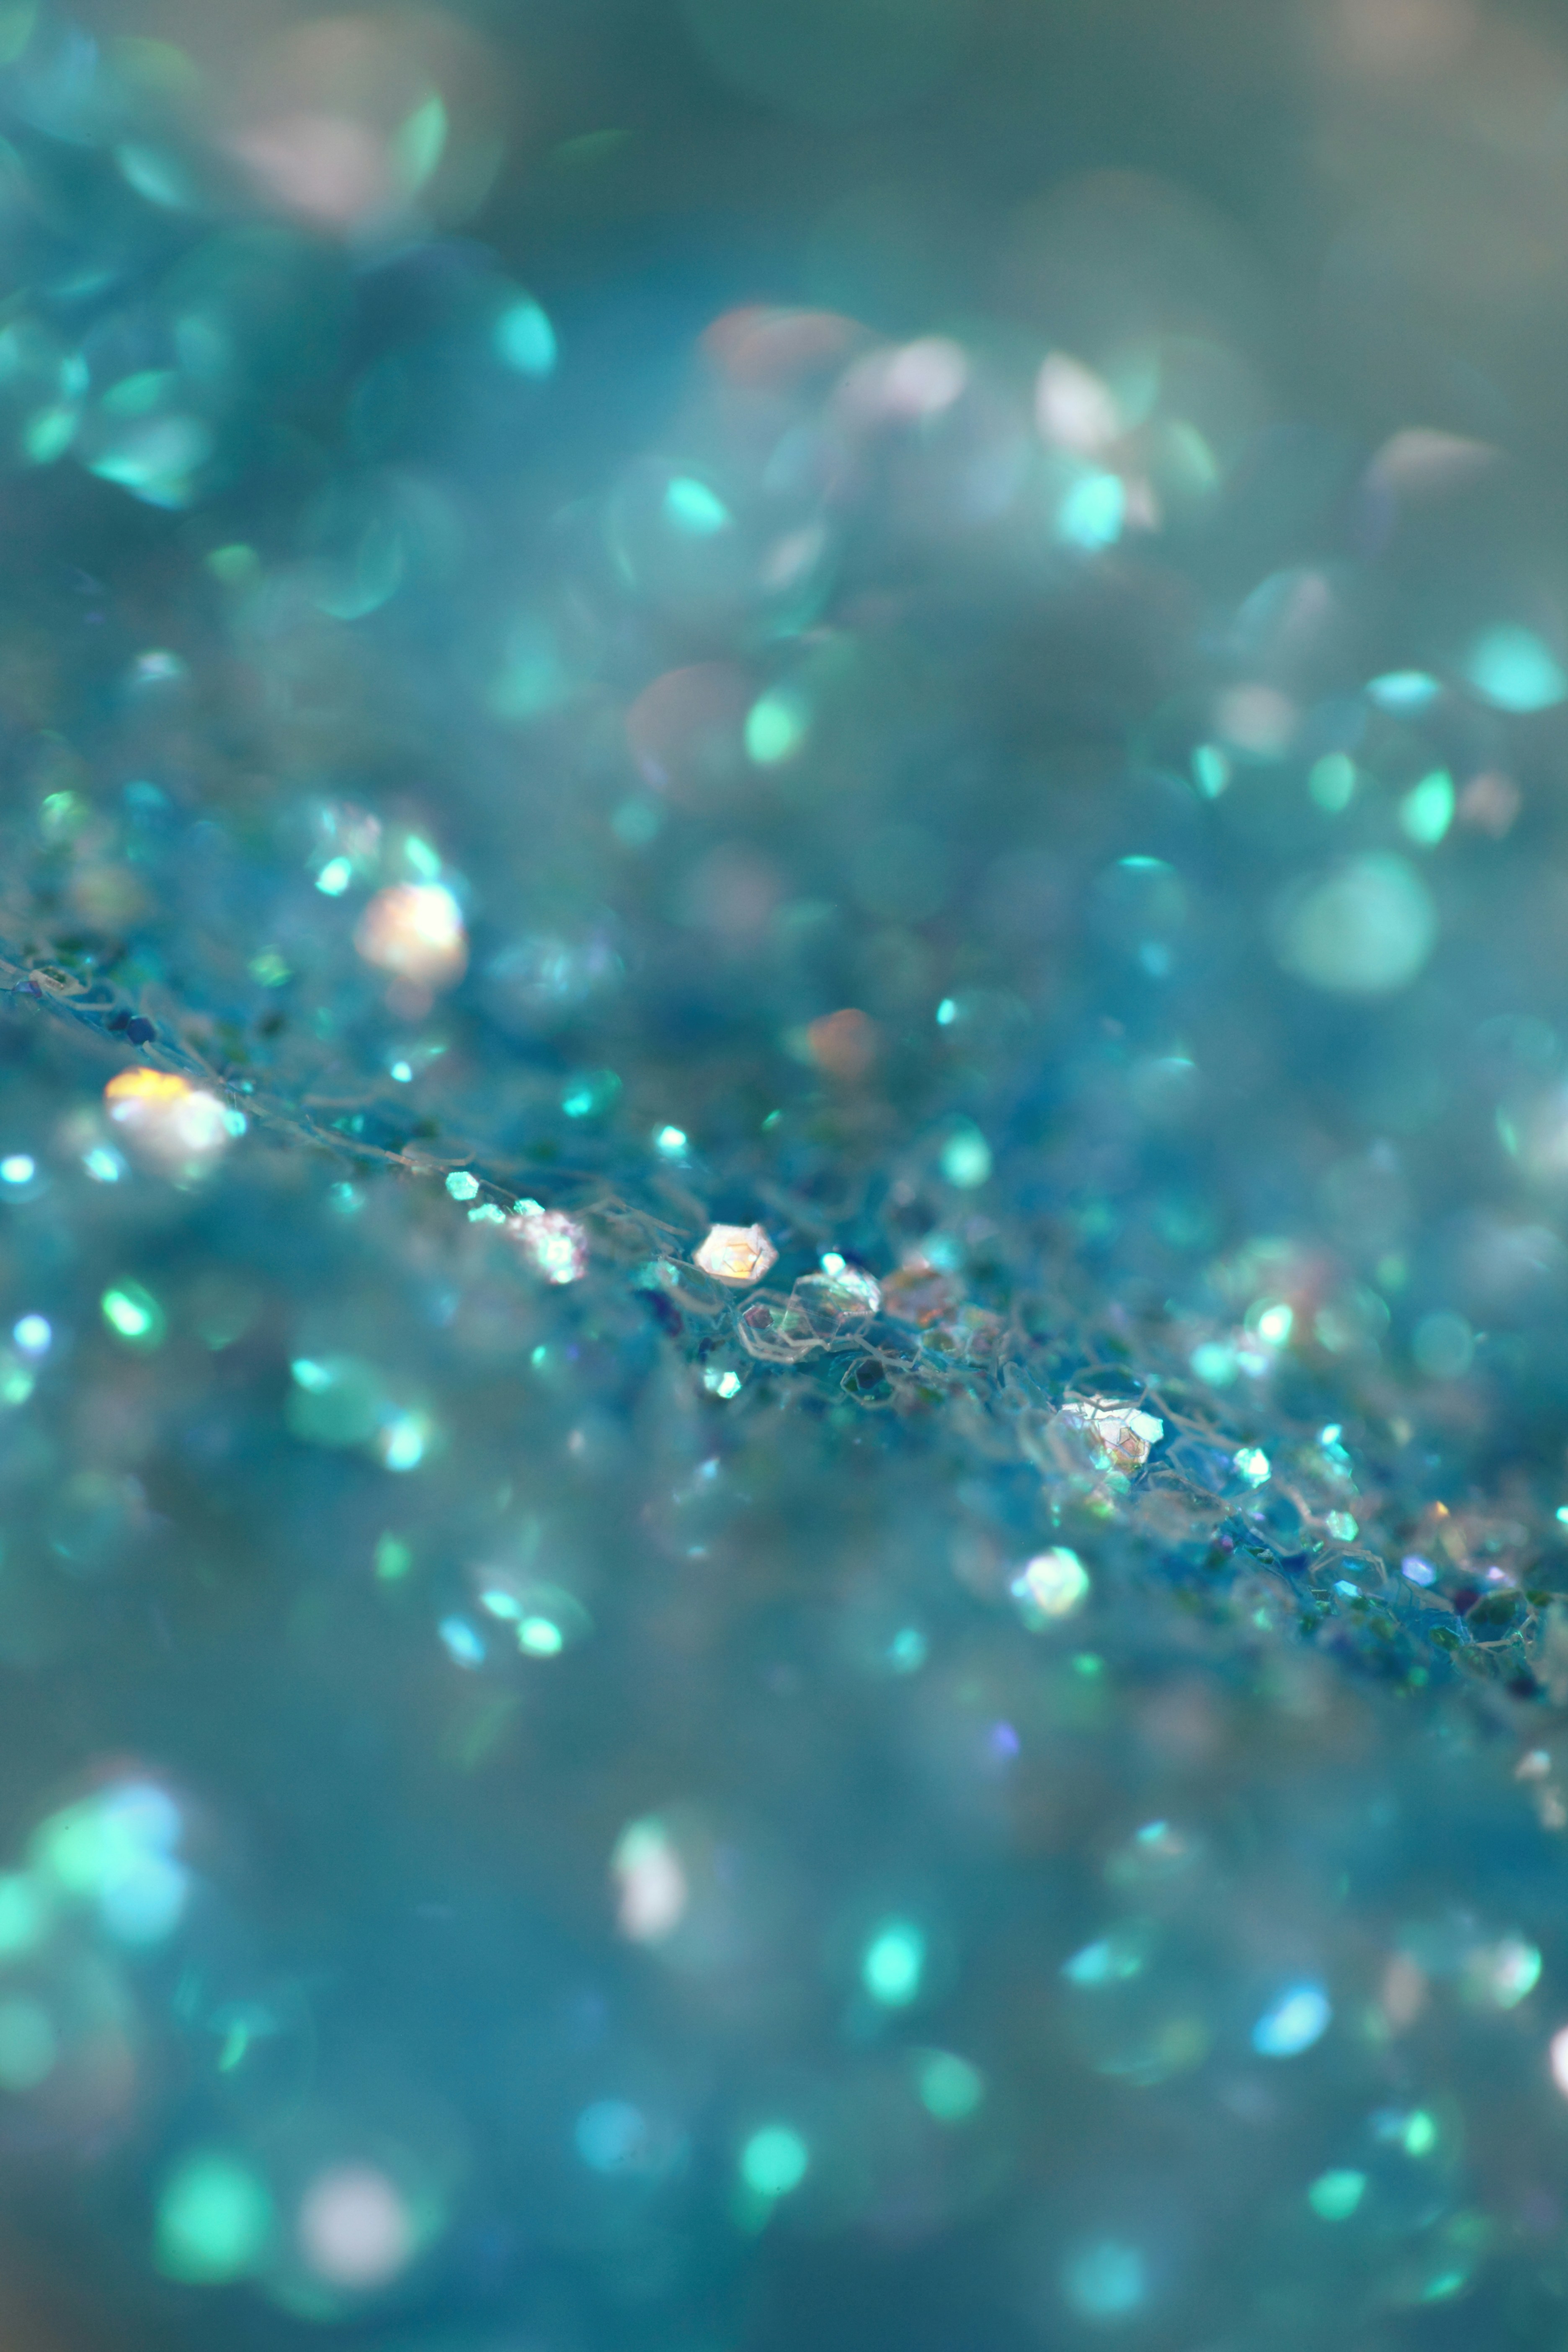 Such a magical, shimmery image. Makes me imagine mermaids and opals.